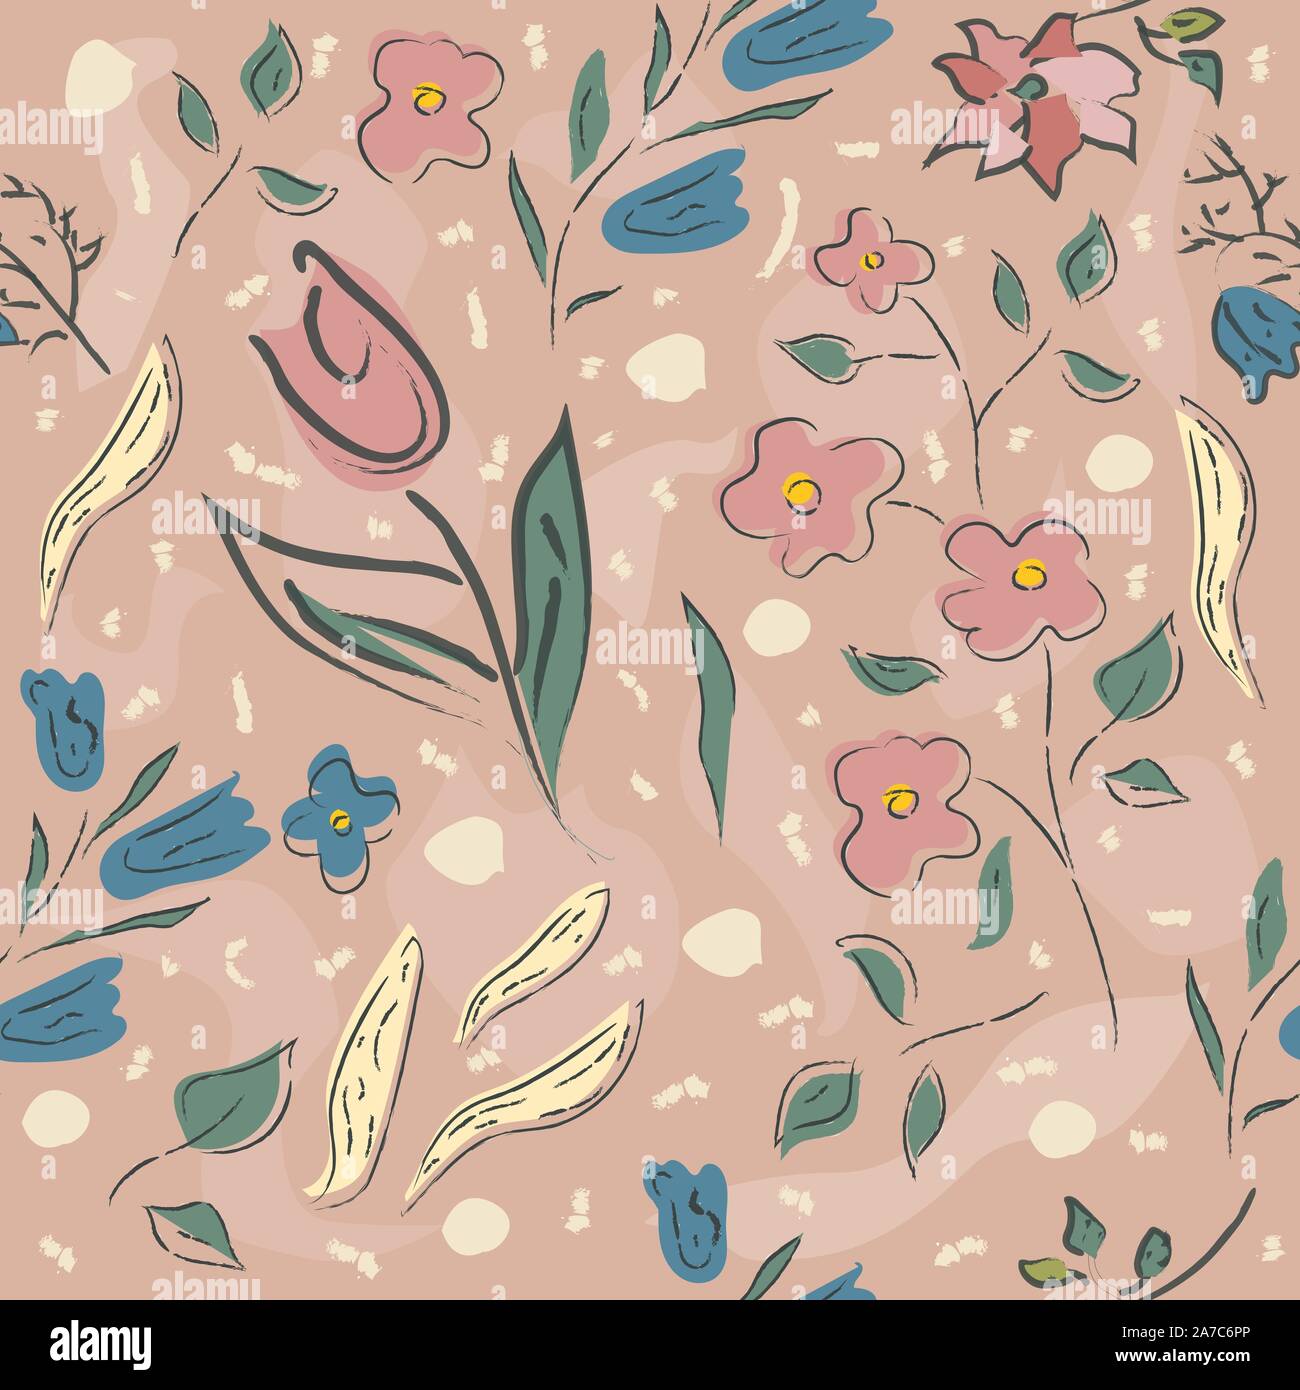 Floral Seamless Pattern. For backgrounds, wallpapers, fabric, prints, textiles, wrapping, cards, swatches, t-shirts, scrapbooks, blankets, pillows, et Stock Vector